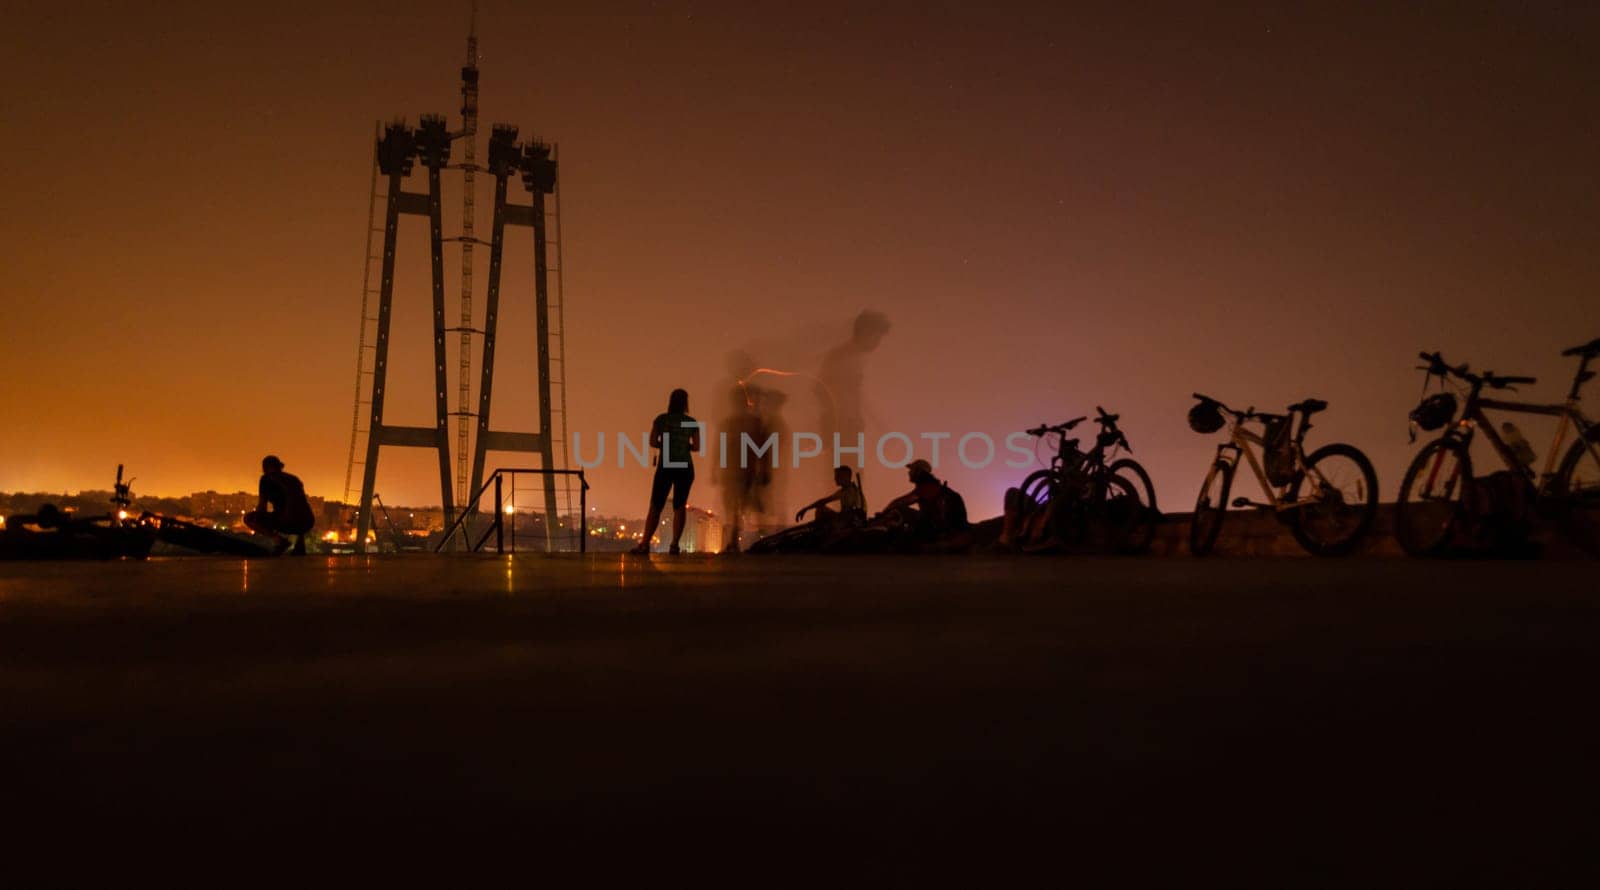 Cycling outdoor adventure. bikes with people night landscape. Outdoor sport activity. silhouette of group people with bicycles on industrial background